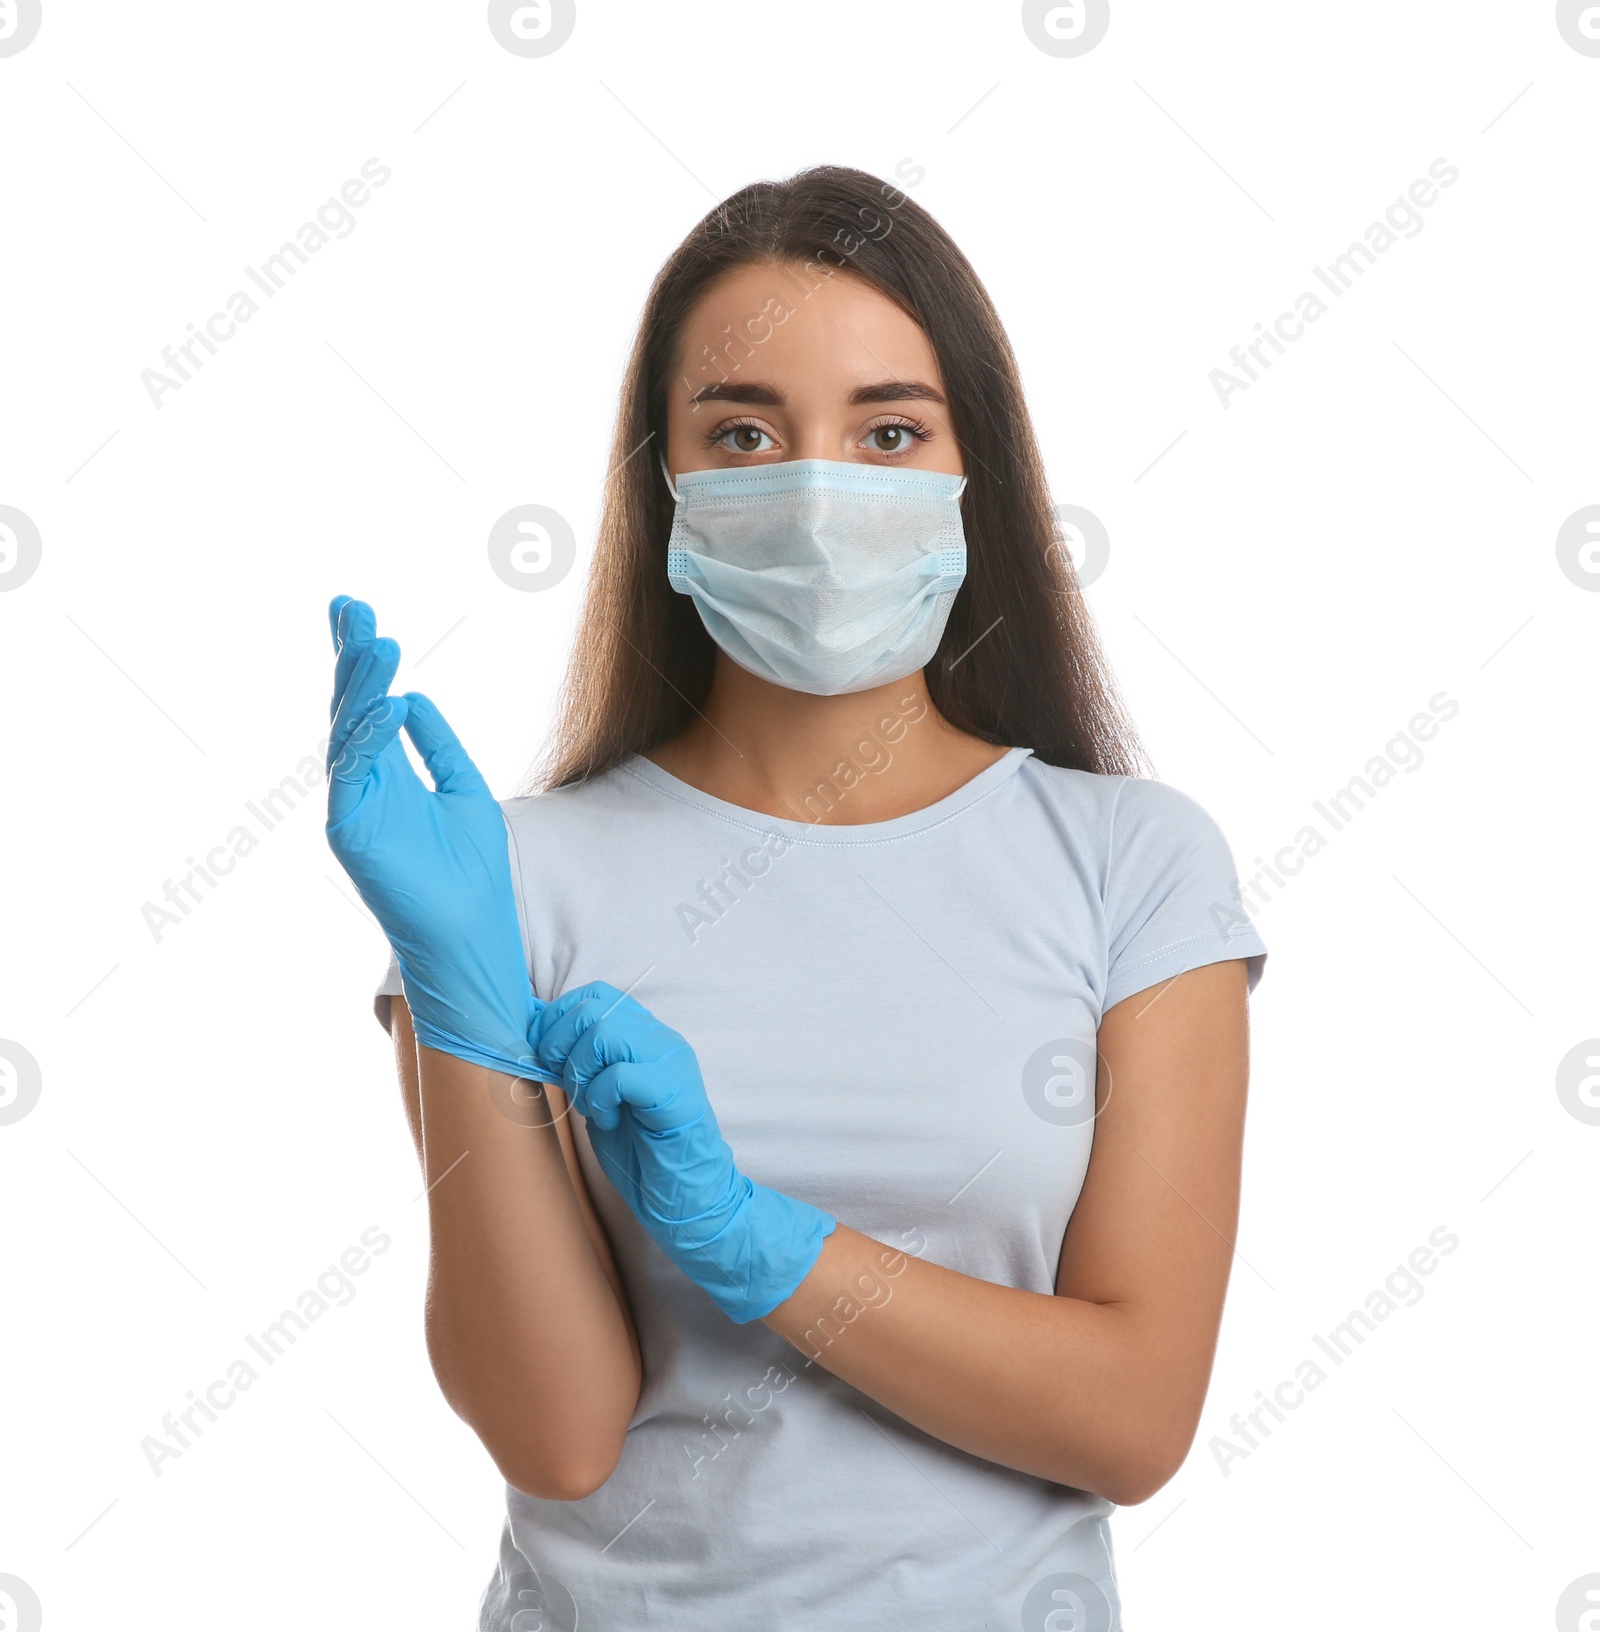 Photo of Woman in protective face mask putting on medical gloves against white background